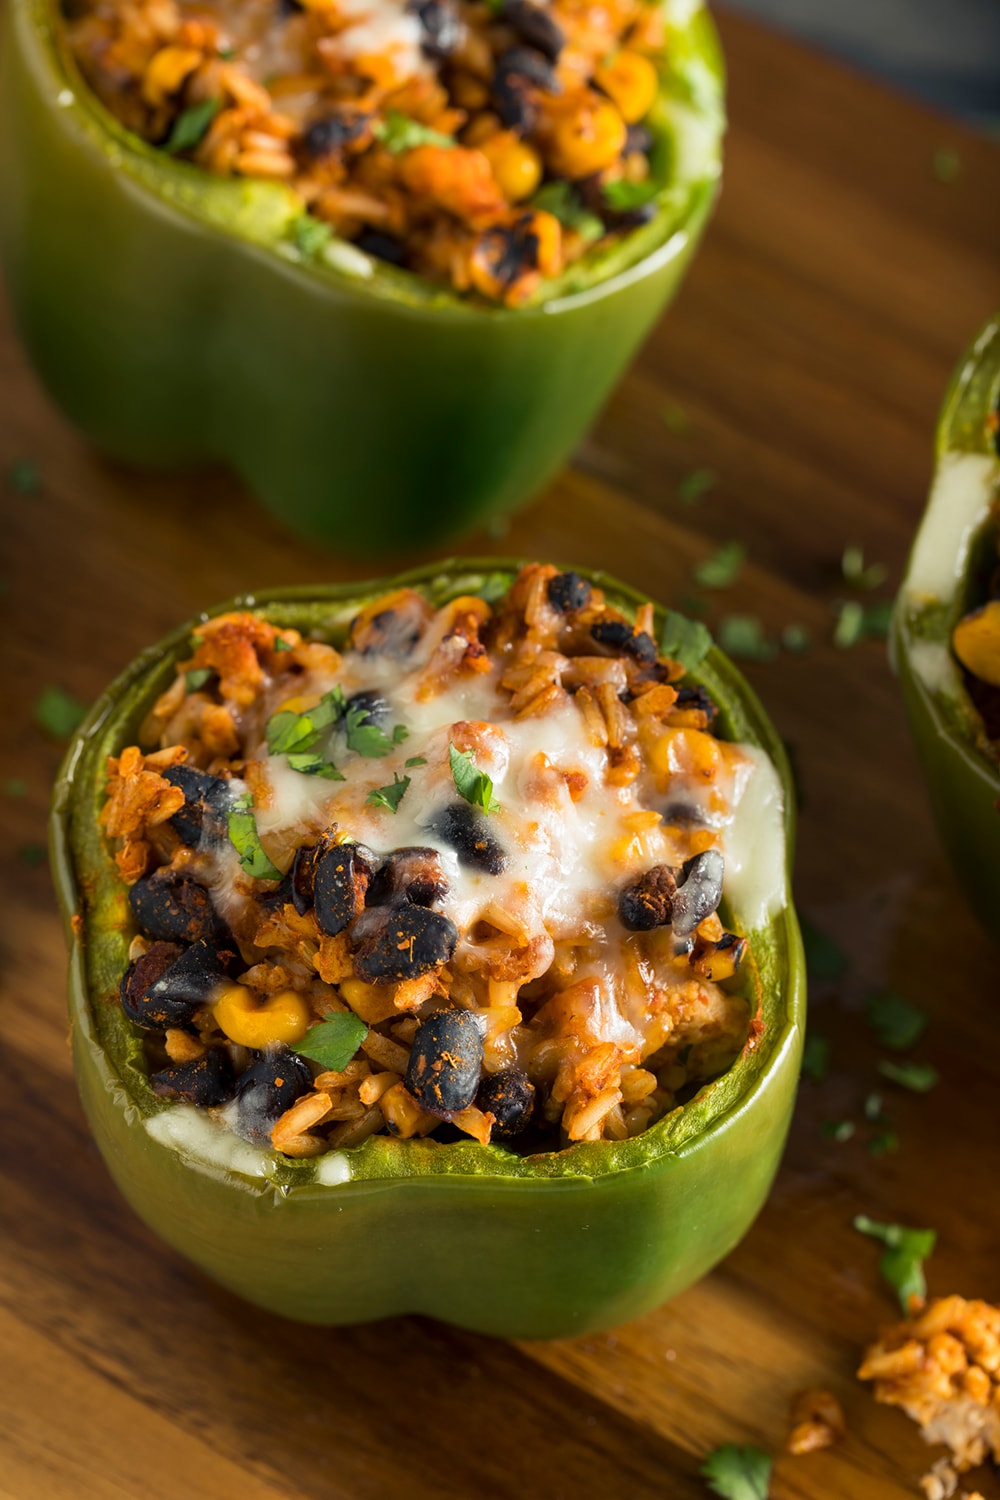 Vegetarian stuffed bell peppers filled with rice, beans, corn, and barbecue sauce.